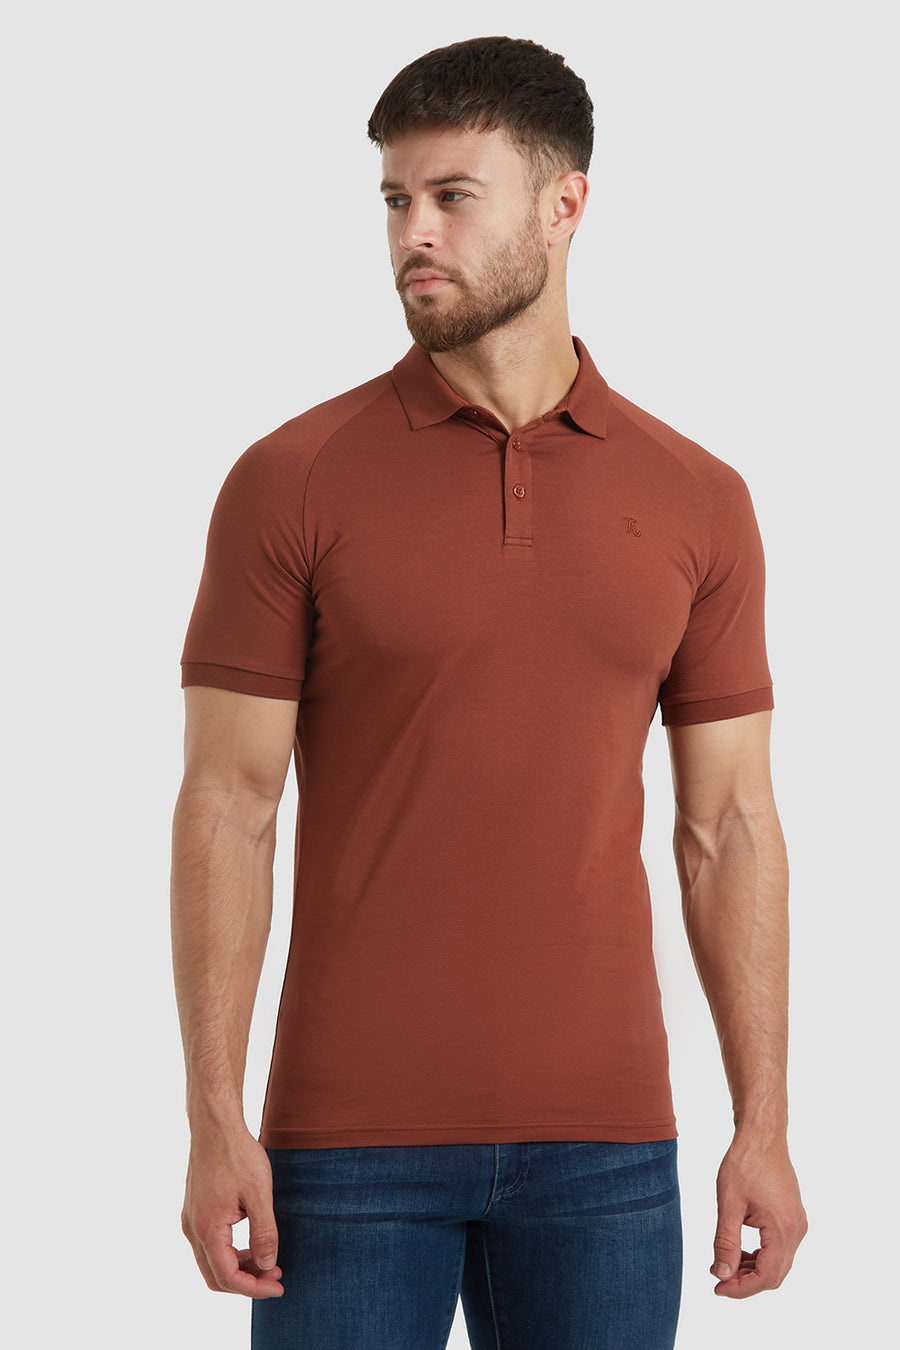 Athletic Fit Polo Shirt in Chestnut - TAILORED ATHLETE - USA